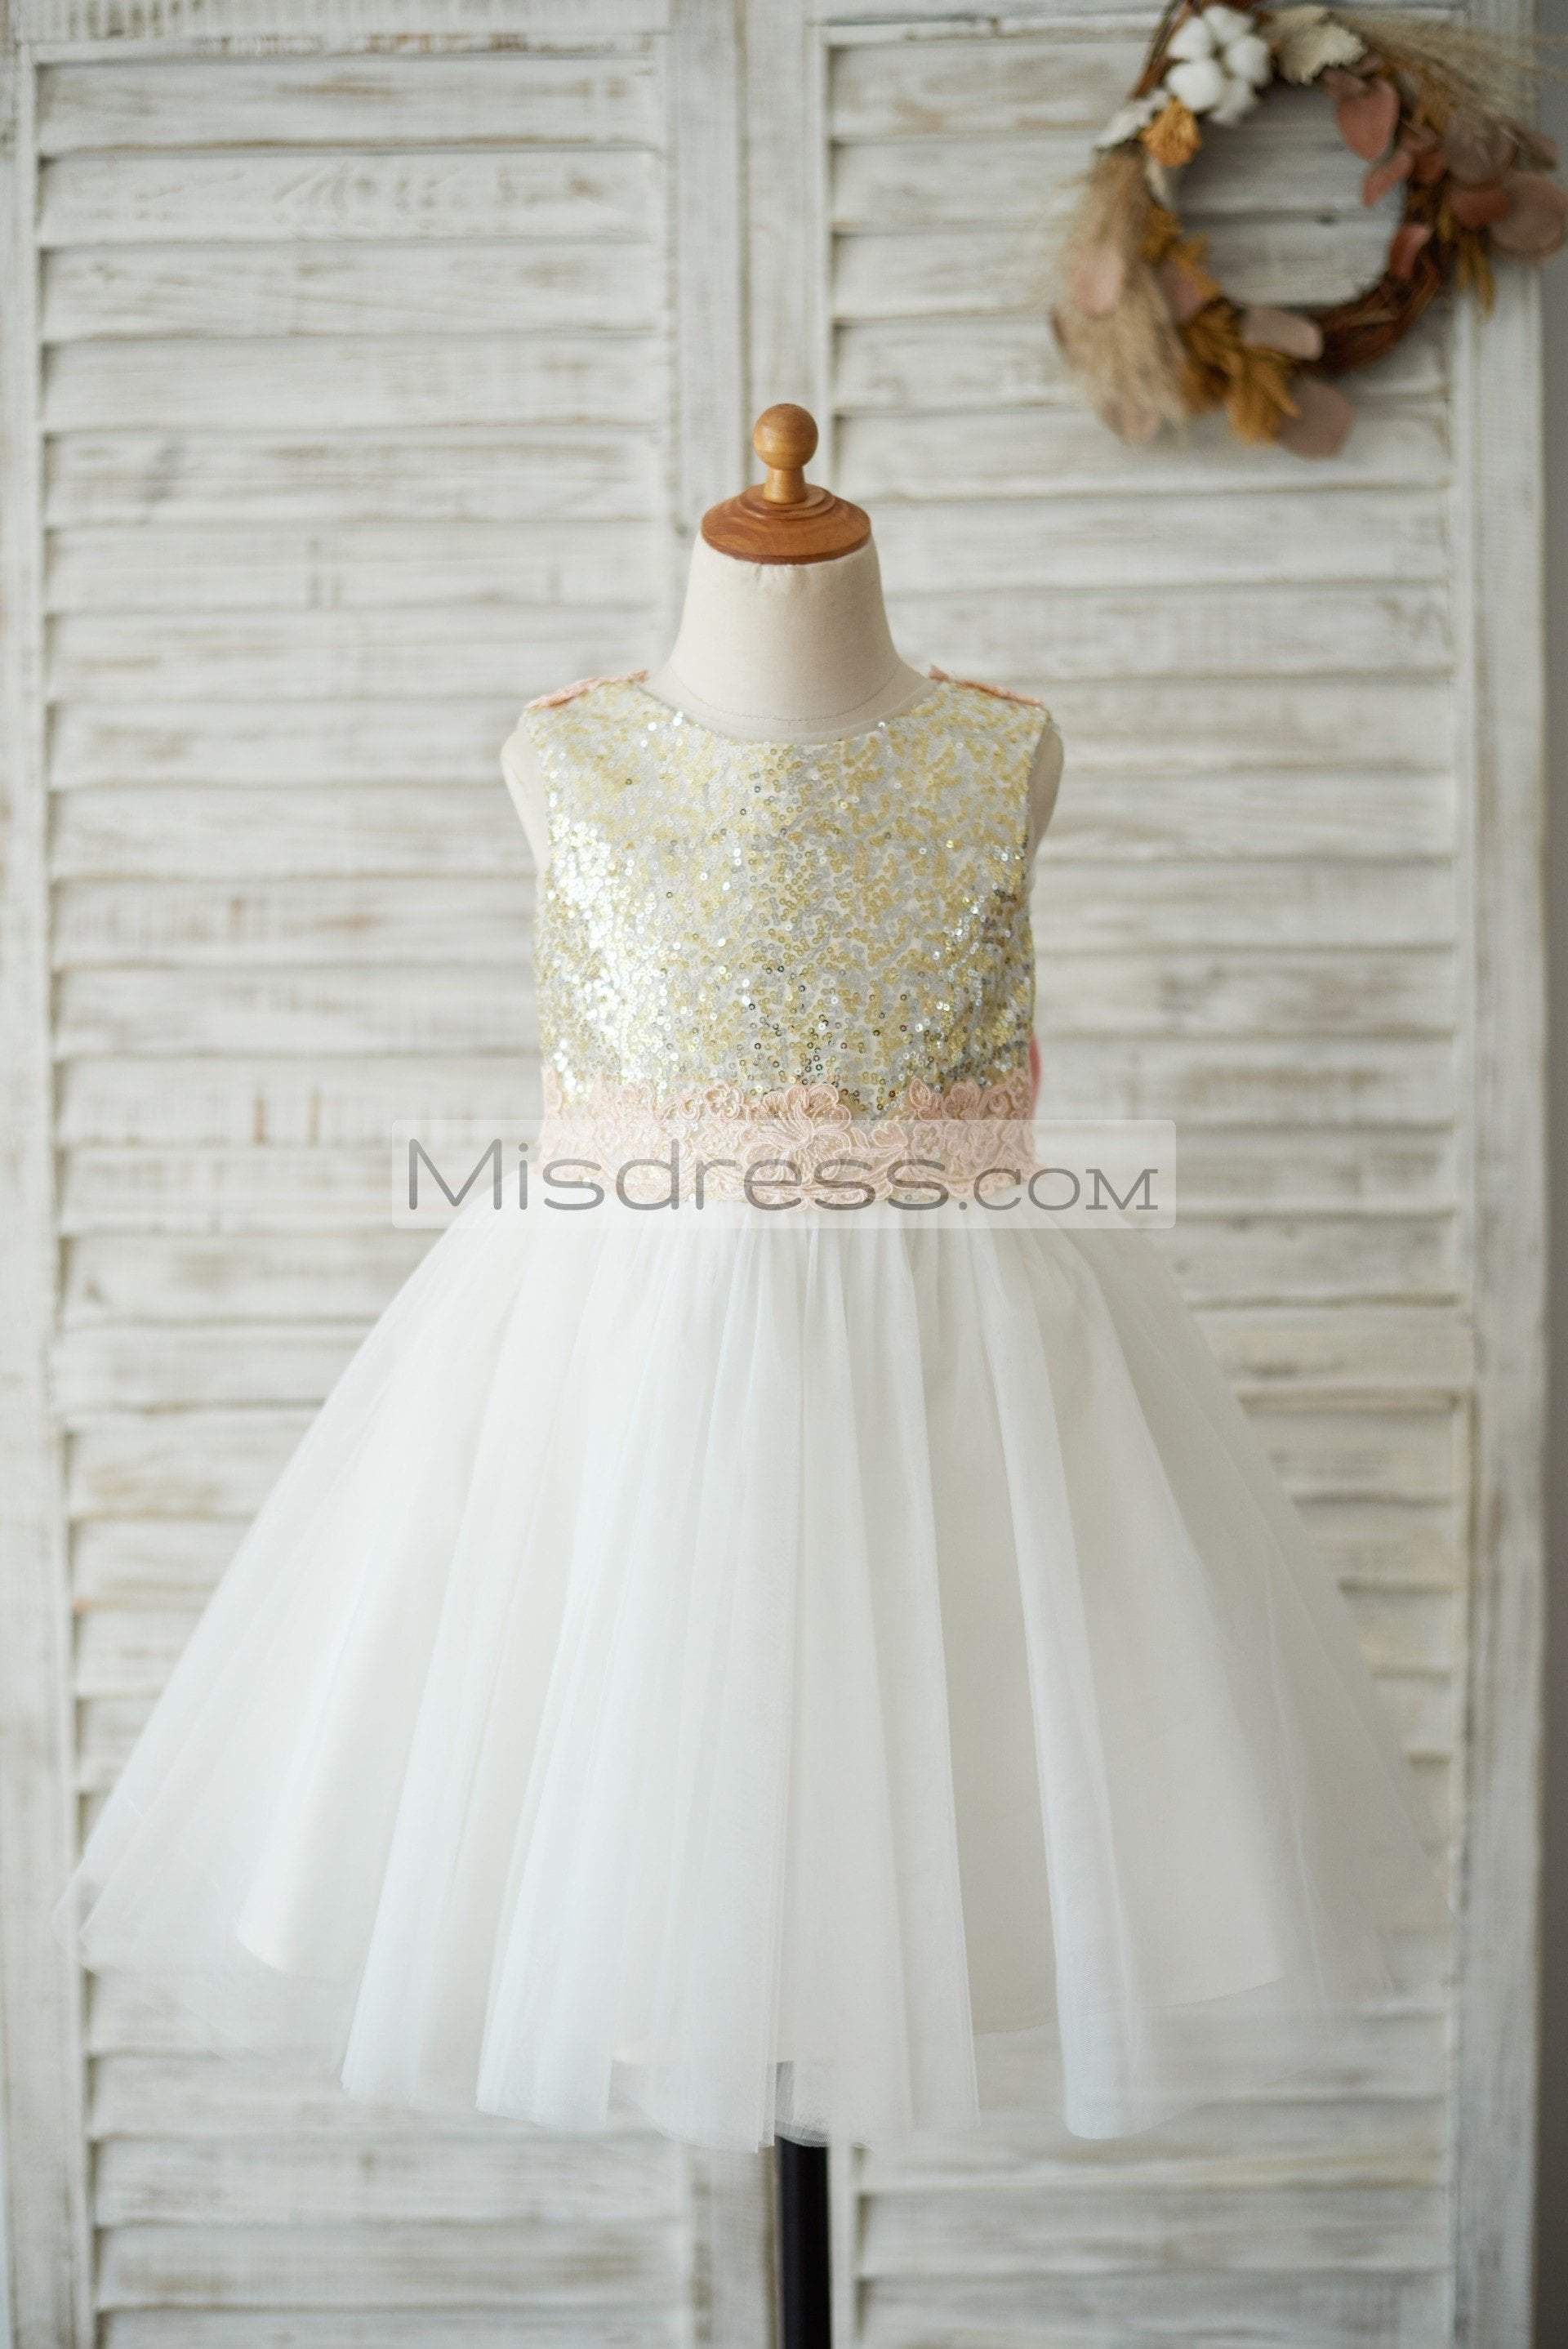 Flower Girl Dress Gold With Ivory or White Tulle With Black Satin Ribbon  Belt, Gold Sequin Dress Tulle, Christmas Dress Toddler and Girls 